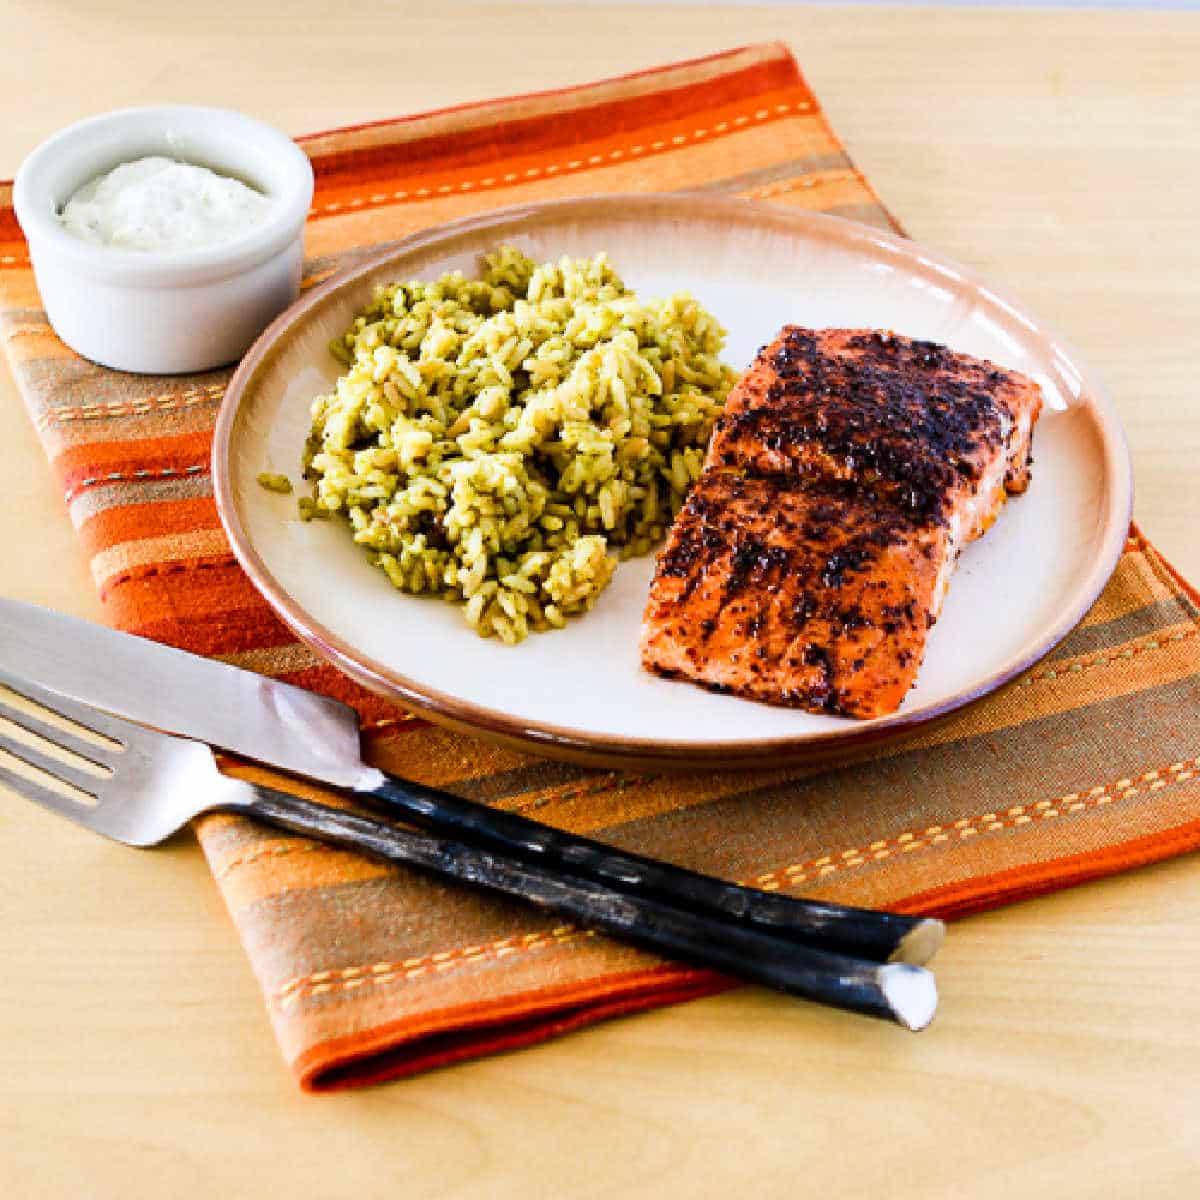 Square image of Salmon Roasted in Olive Oil shown on serving plate.